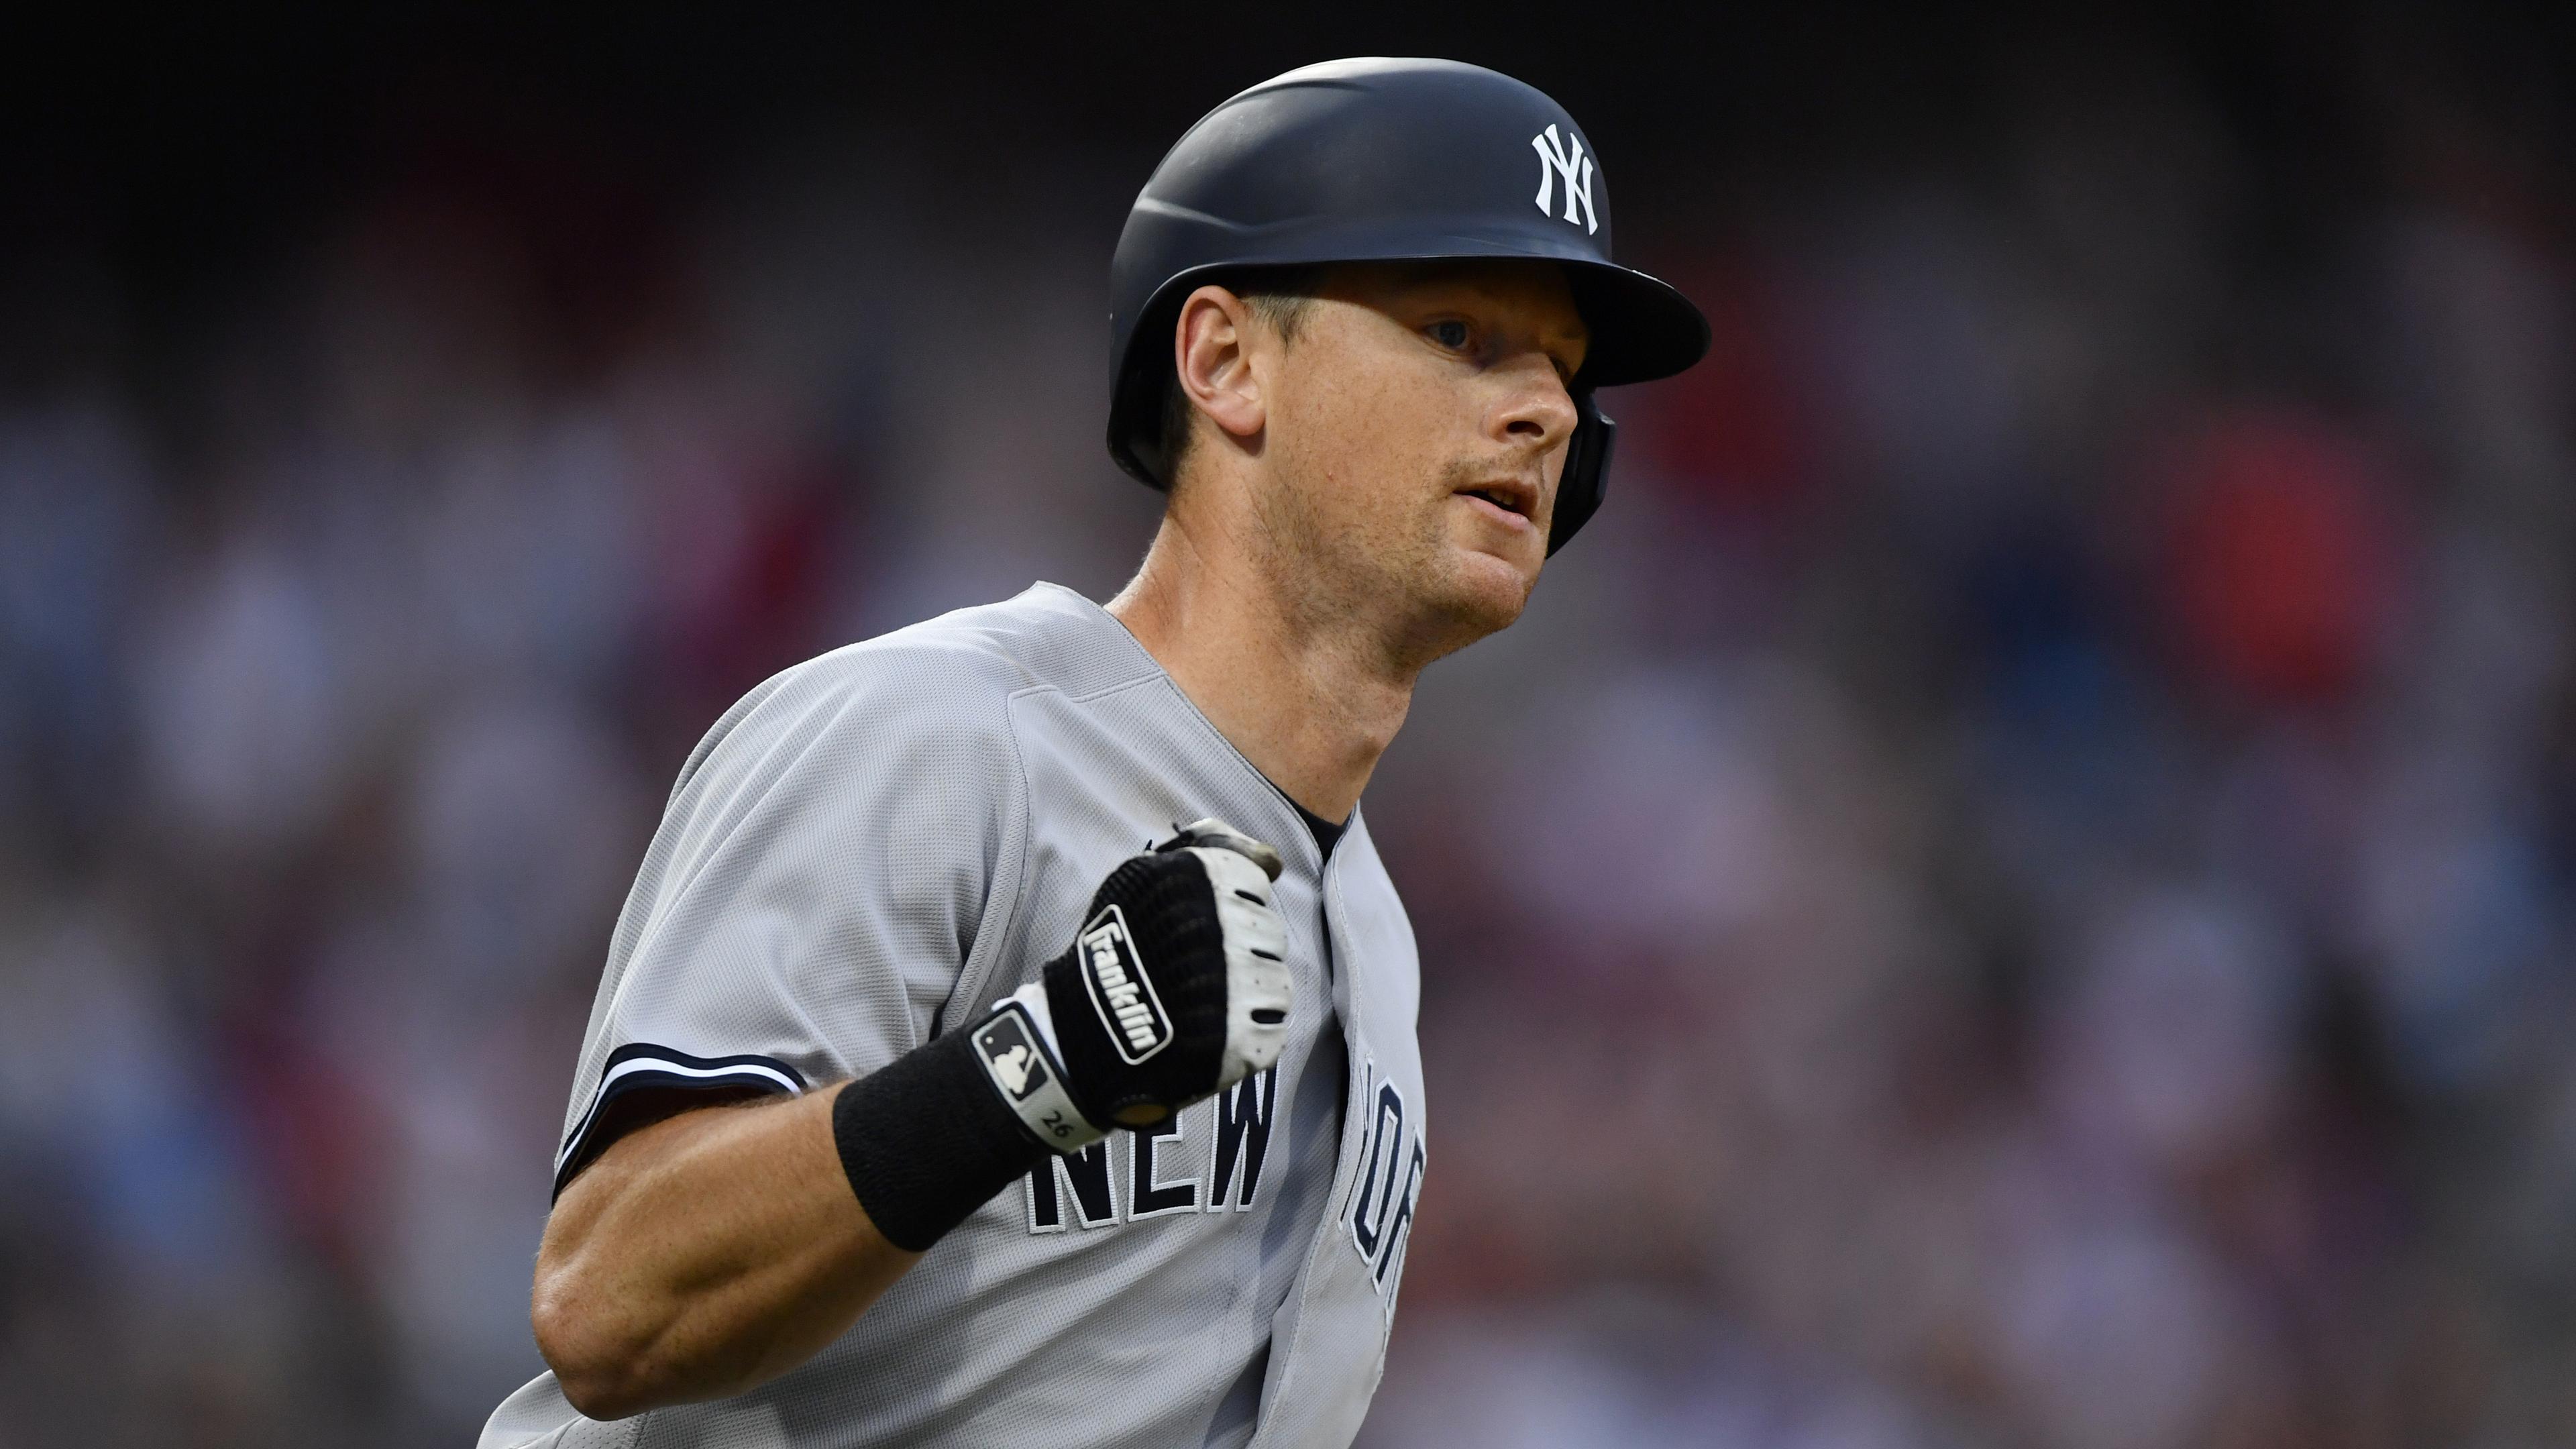 New York Yankees first baseman DJ LeMahieu (26) reacts after hitting a three-run home run during the ninth inning against the Philadelphia Phillies at Citizens Bank Park. / Kyle Ross - USA TODAY Sports